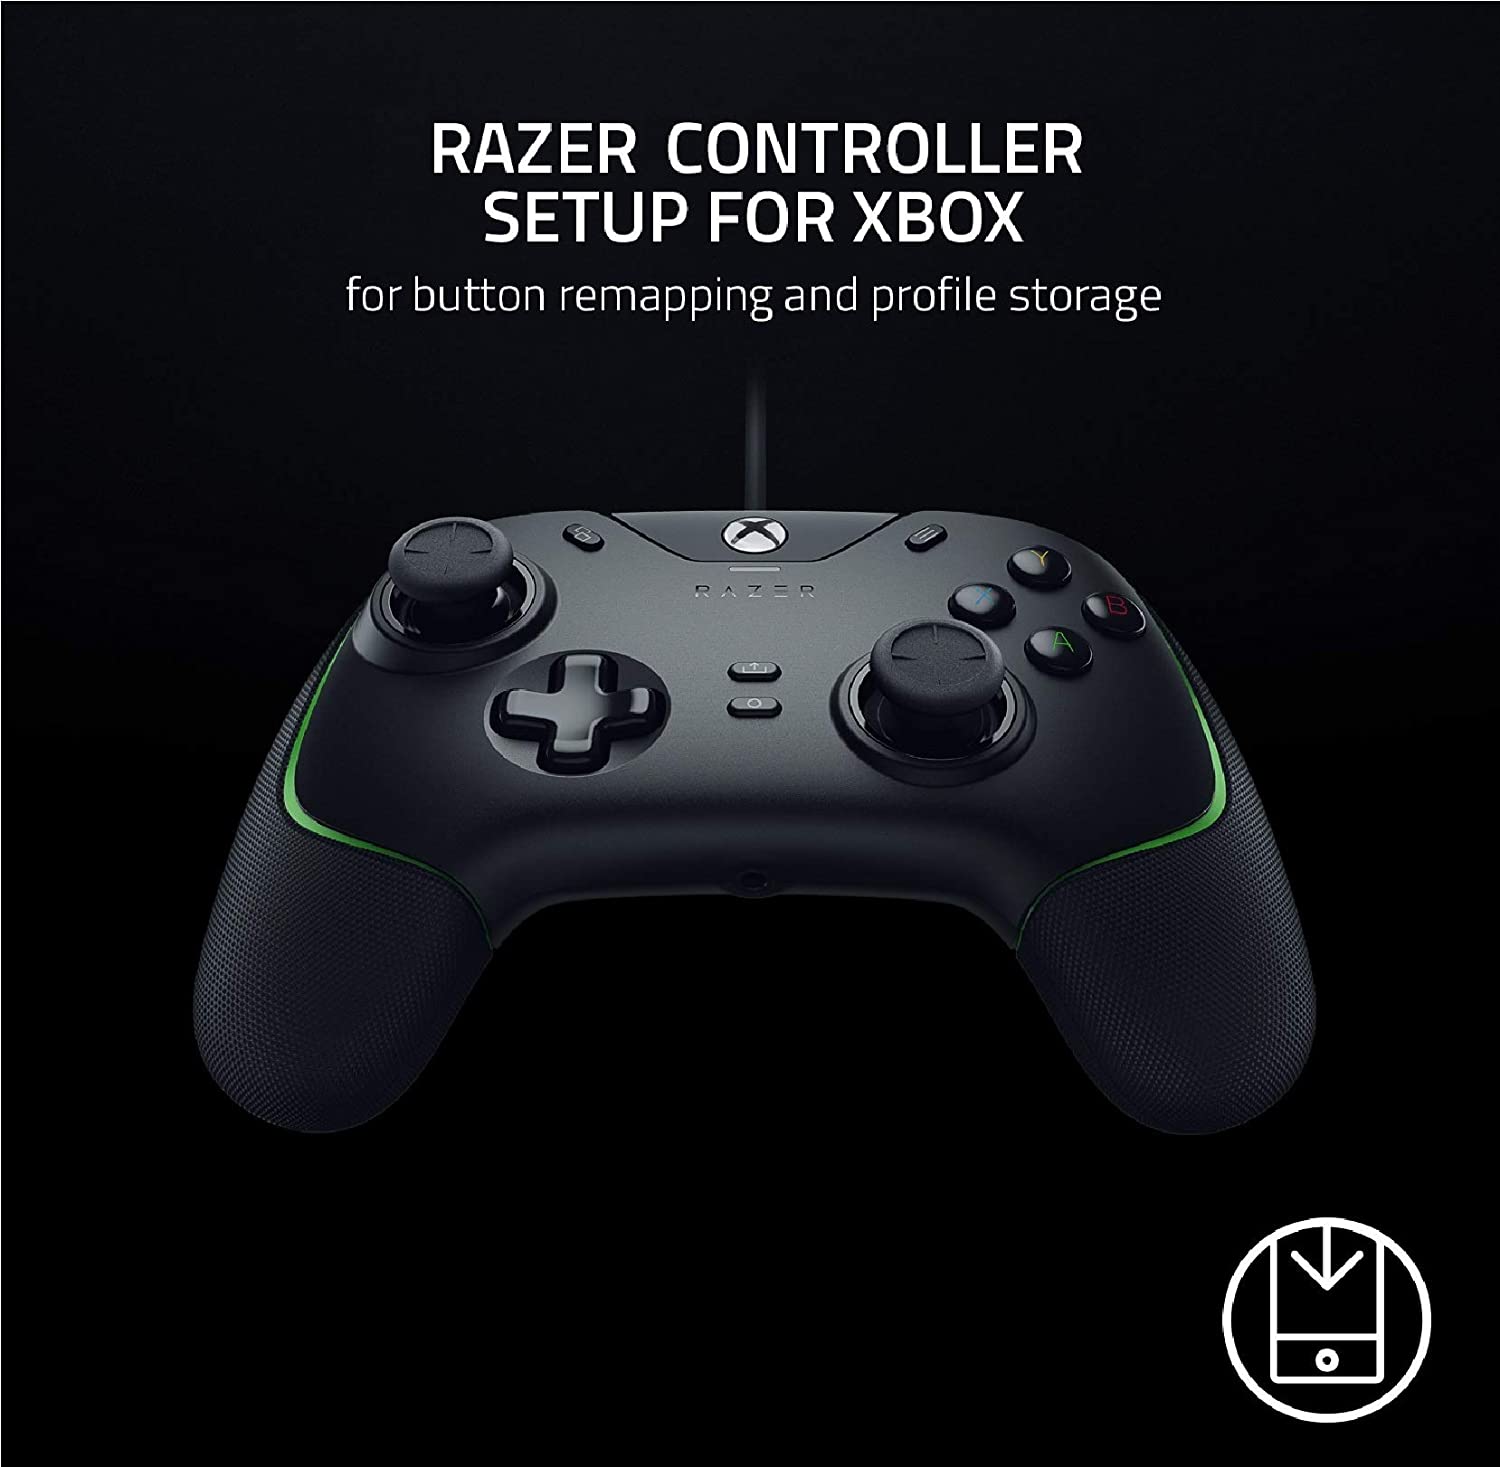 Razer Wolverine V2 Wired Gaming Controller for Xbox One, Series X|S, PC - Reforged to Bring Swift Victory with Mecha-Tactile Action Buttons and D-Pad - Classic Black